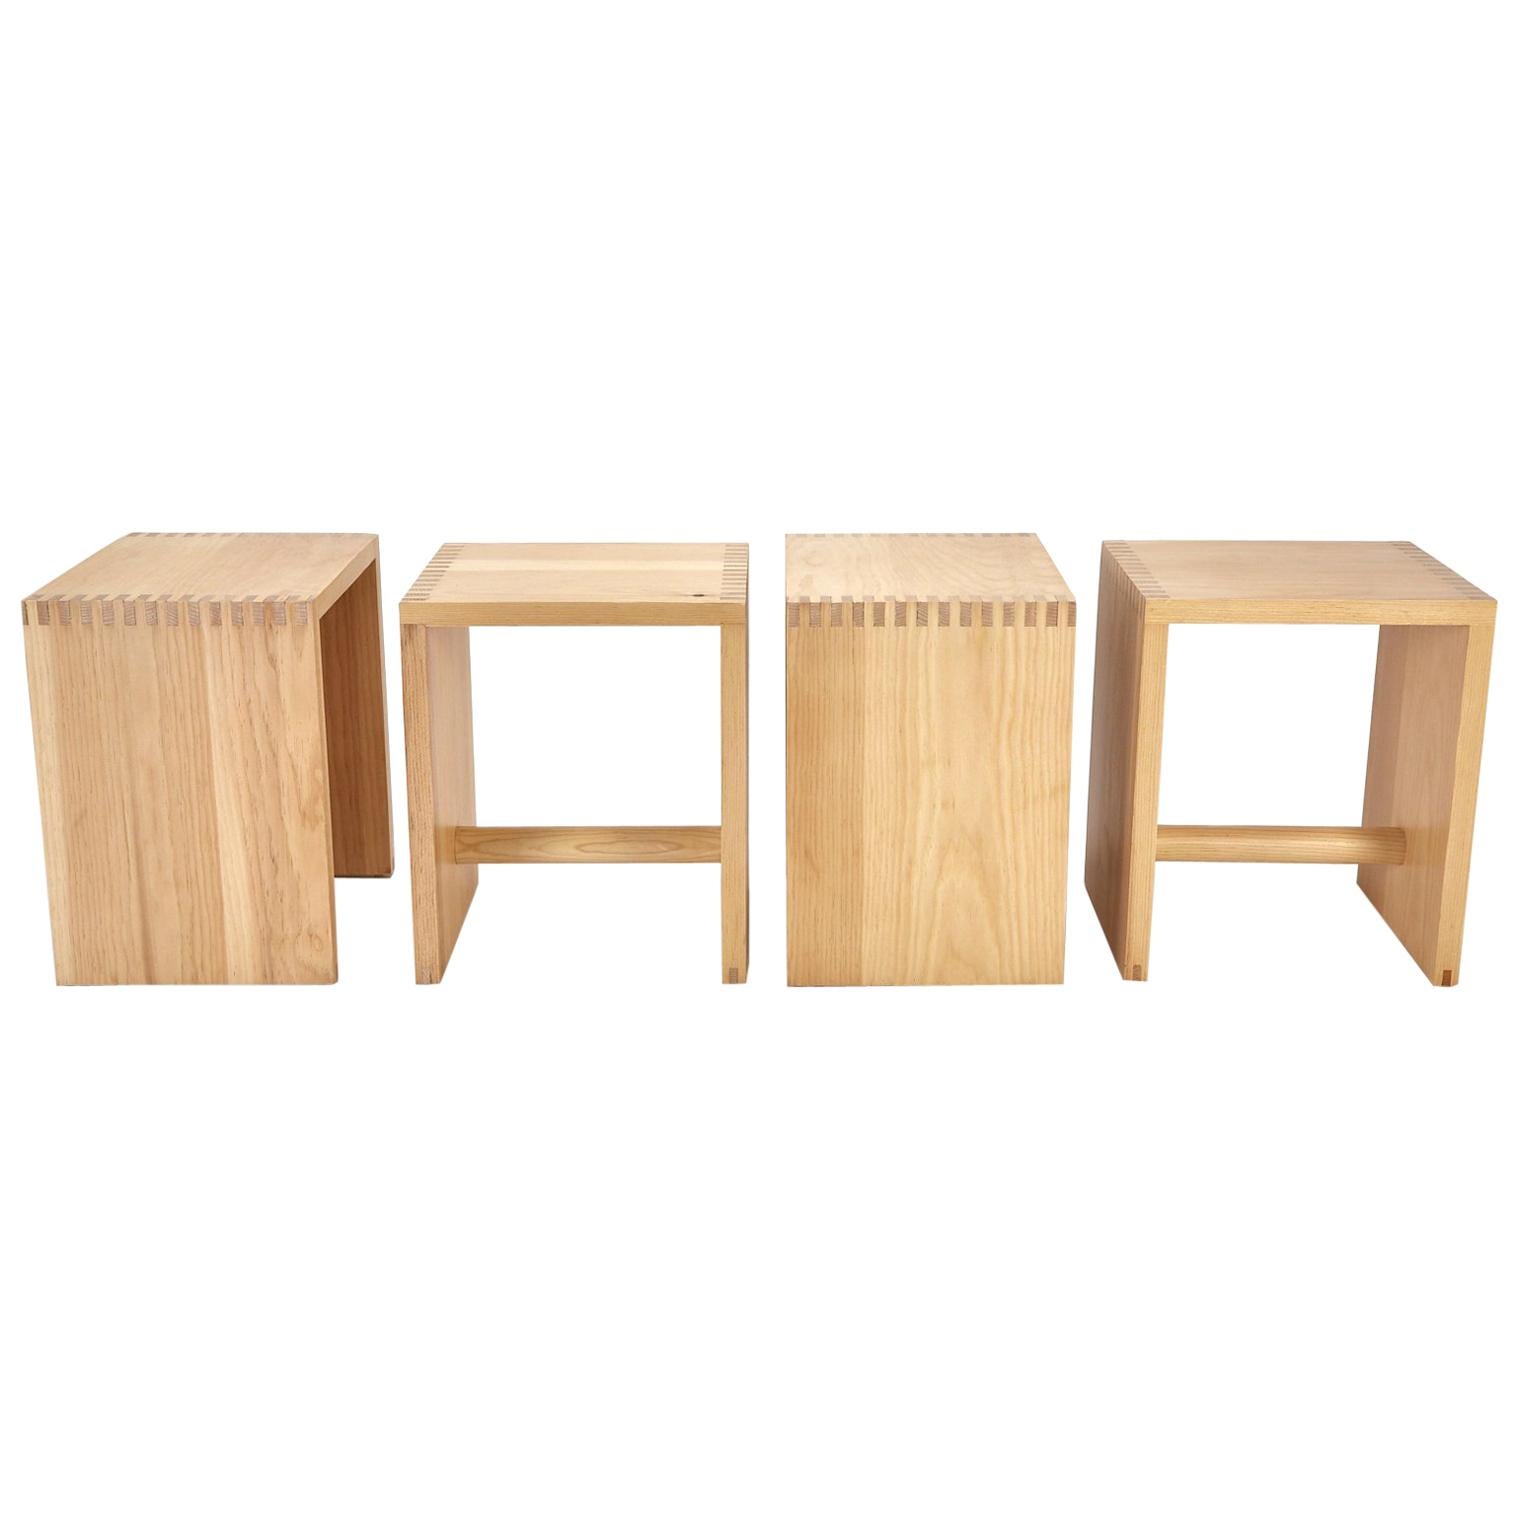 Vintage Set of Four Stools or Side Tables in the Style of Max Bill, 1970s